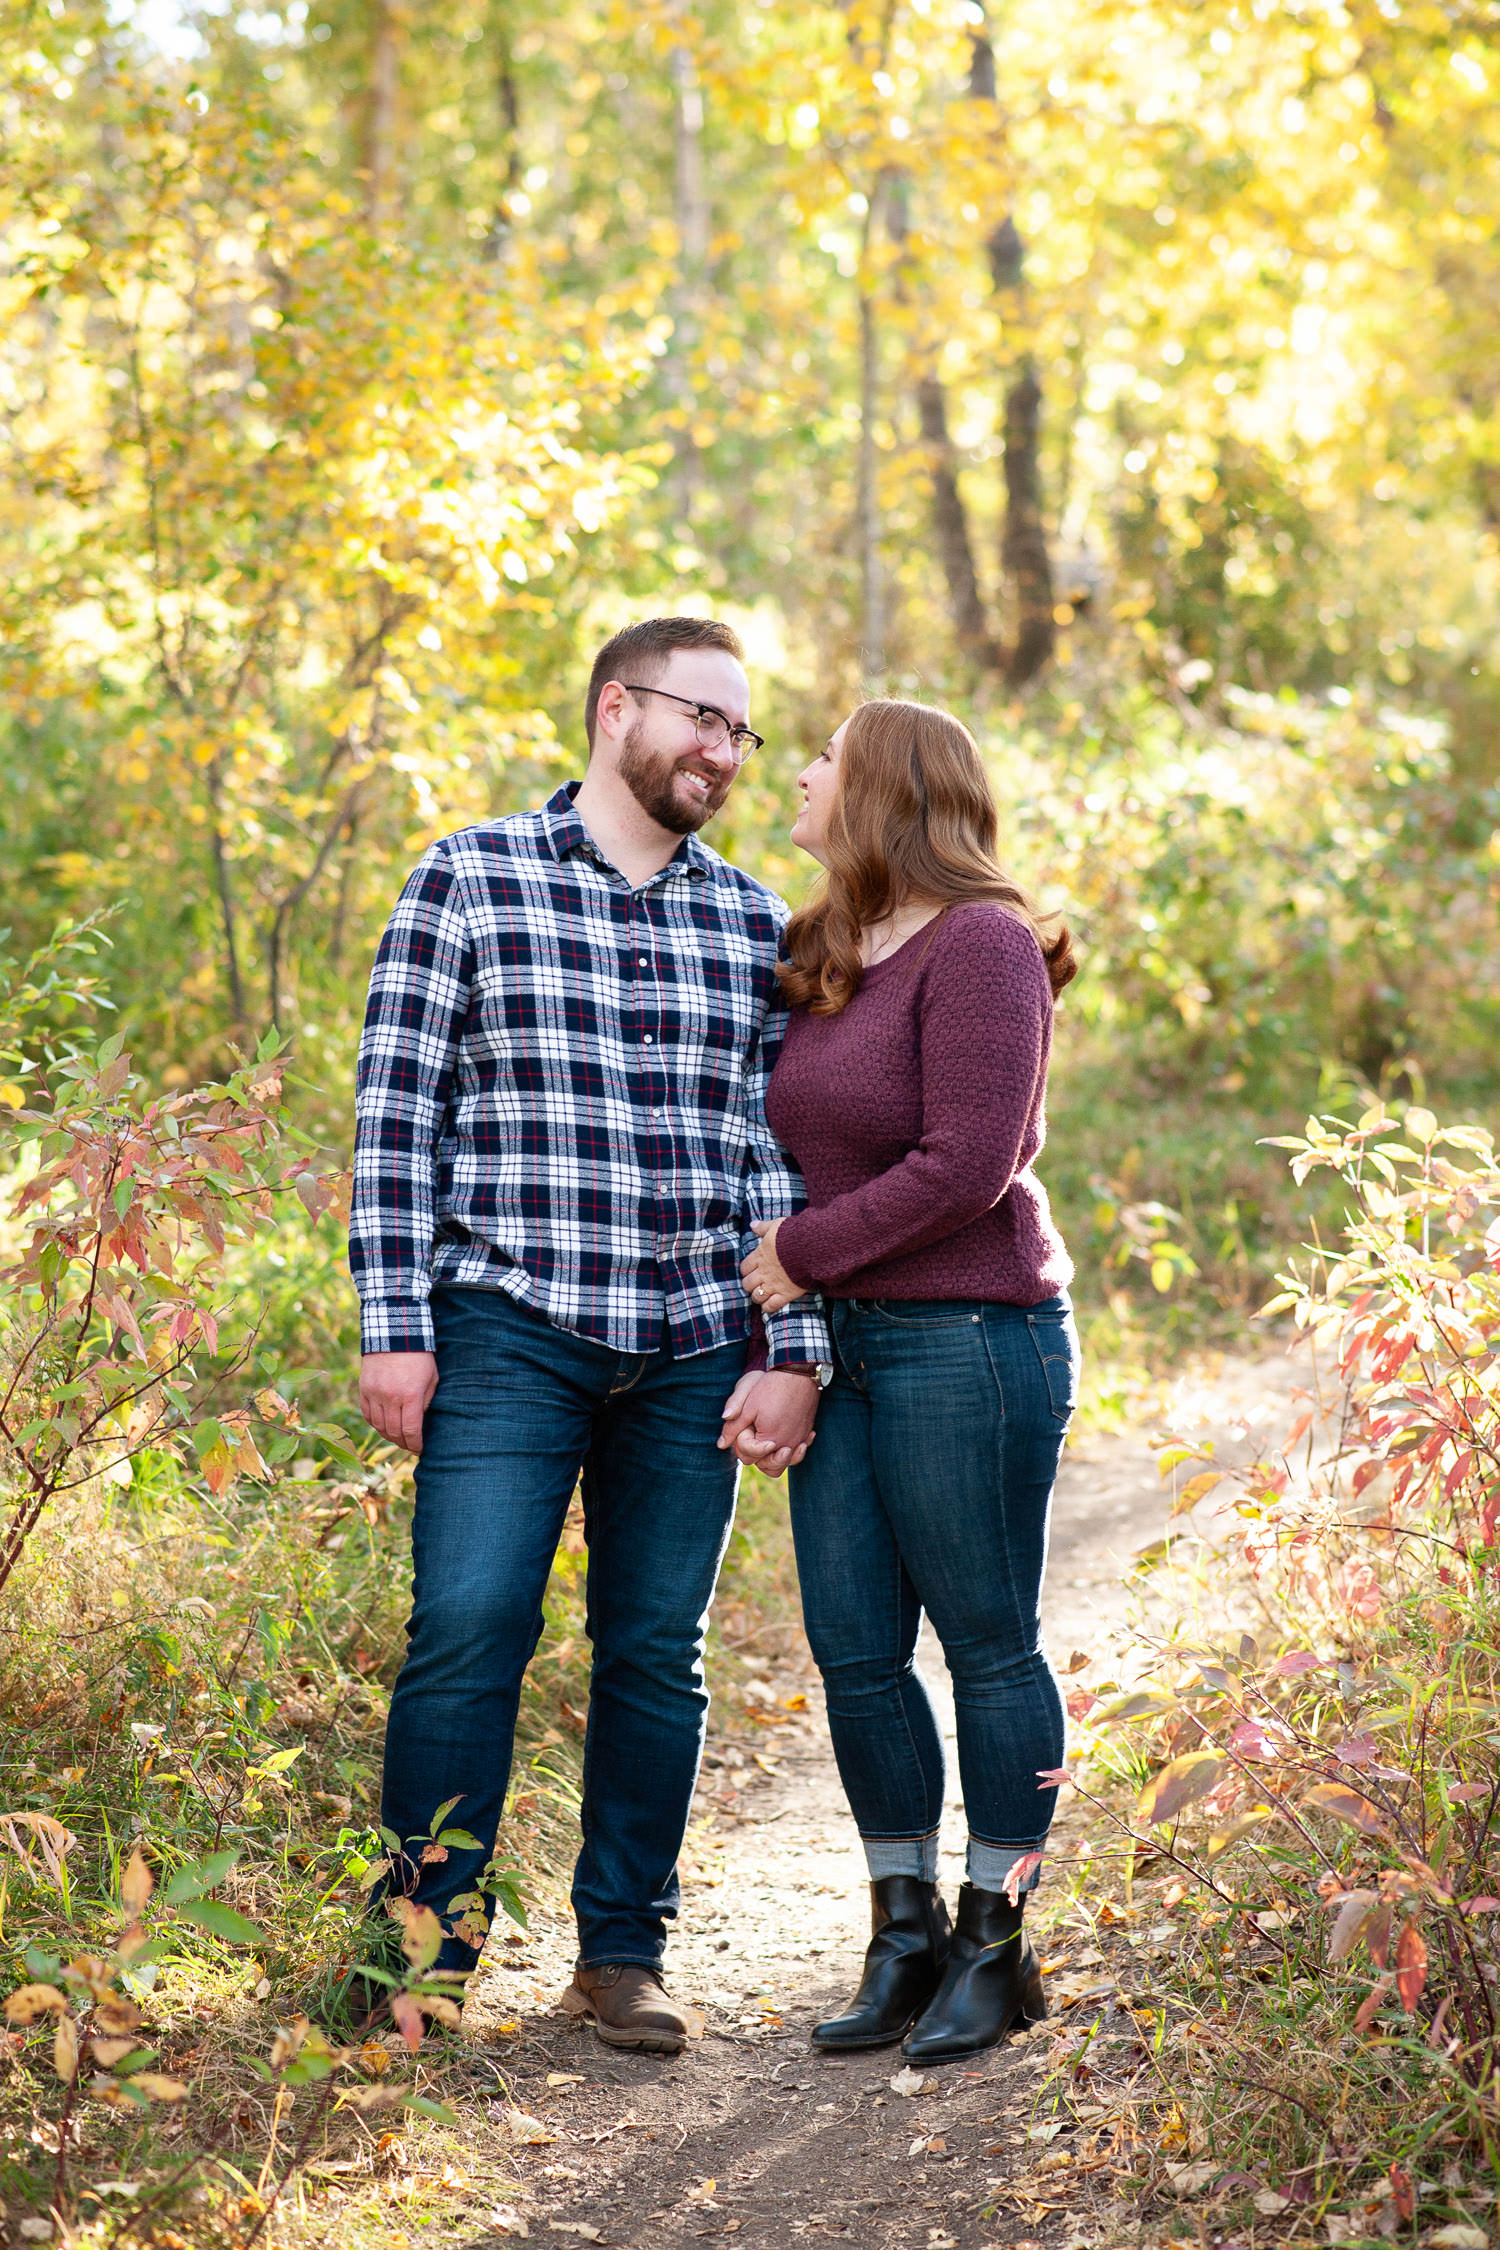 Casual wardrobe ideas for a fall engagement shoot captured by Tara Whittaker